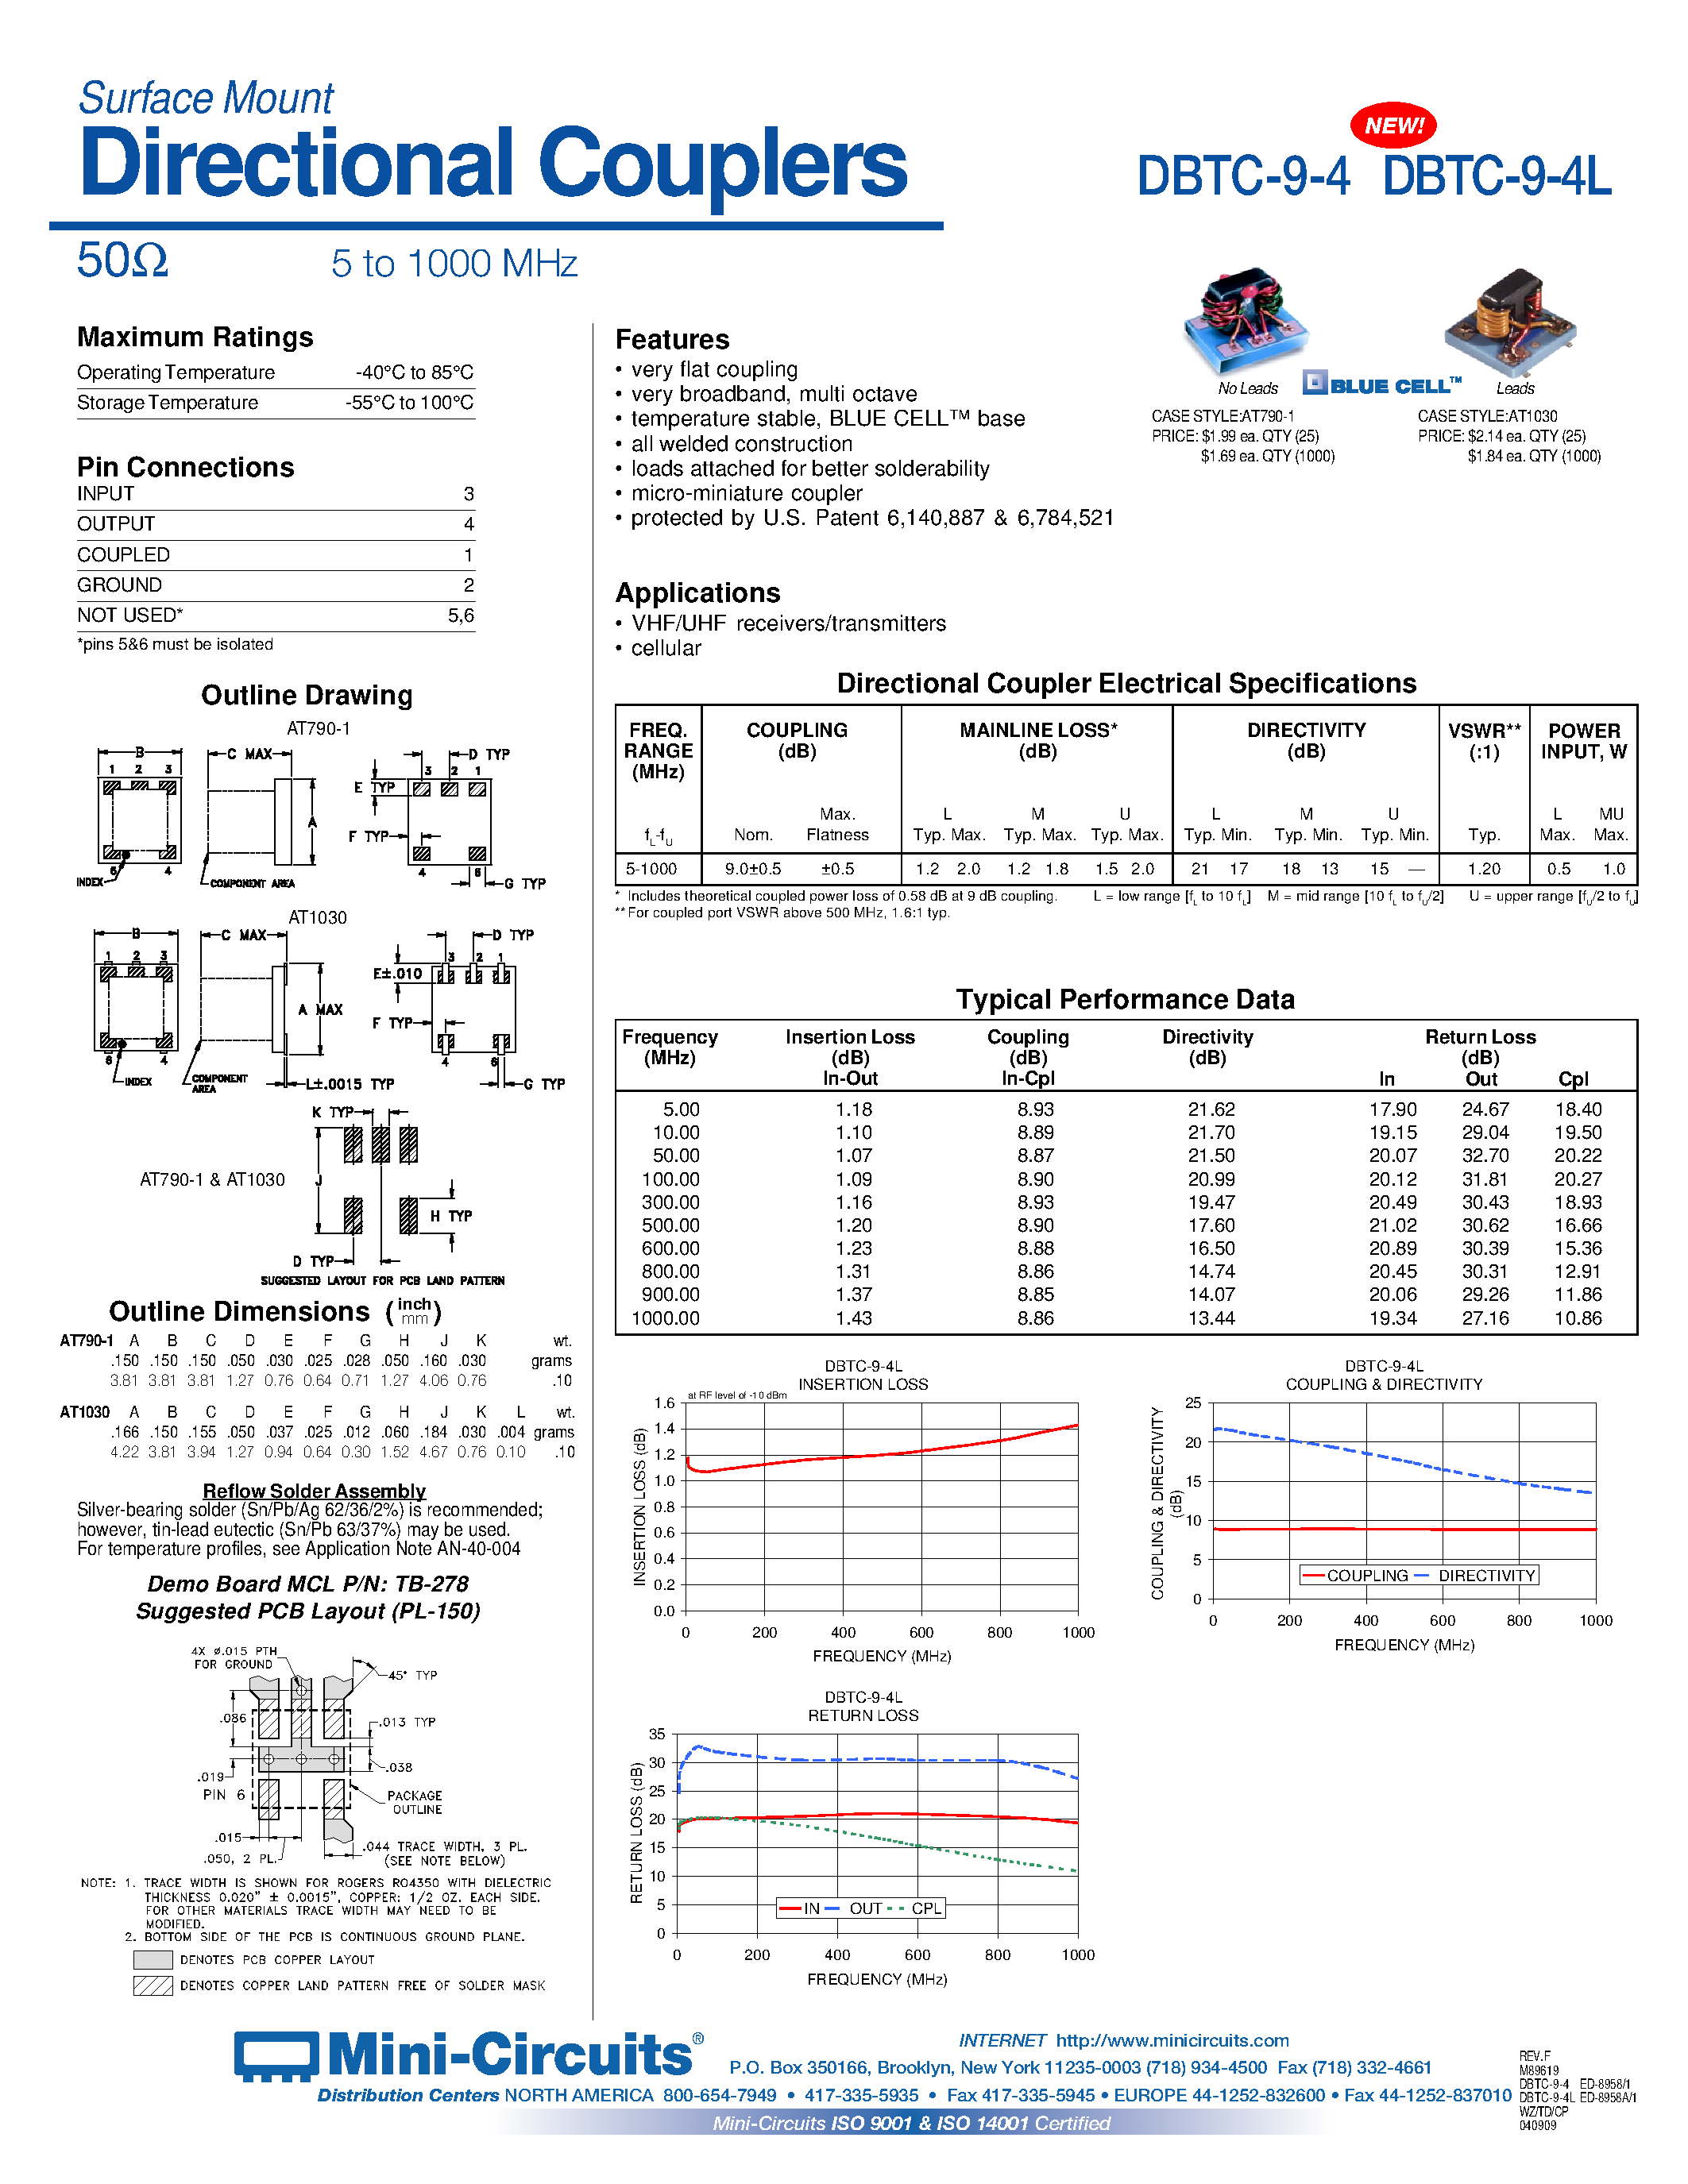 Datasheet DBTC-9-4 - Surface Mount Directional Couplers 50 5 to 1000 MHz page 1